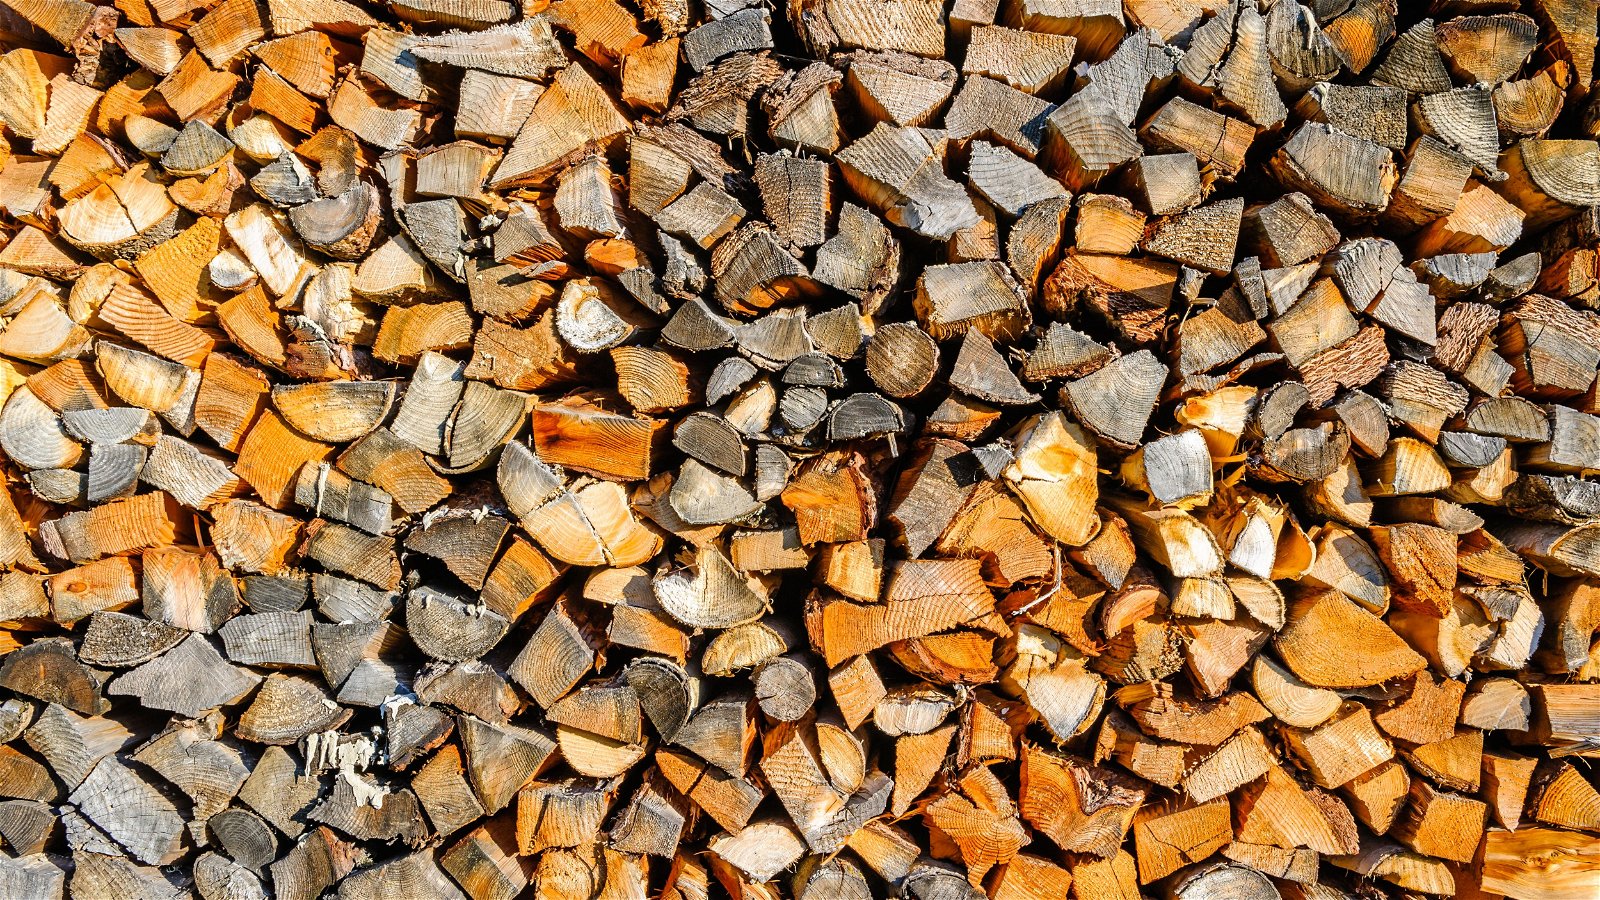 The Extensive Use Of Biomass In Developing Countries